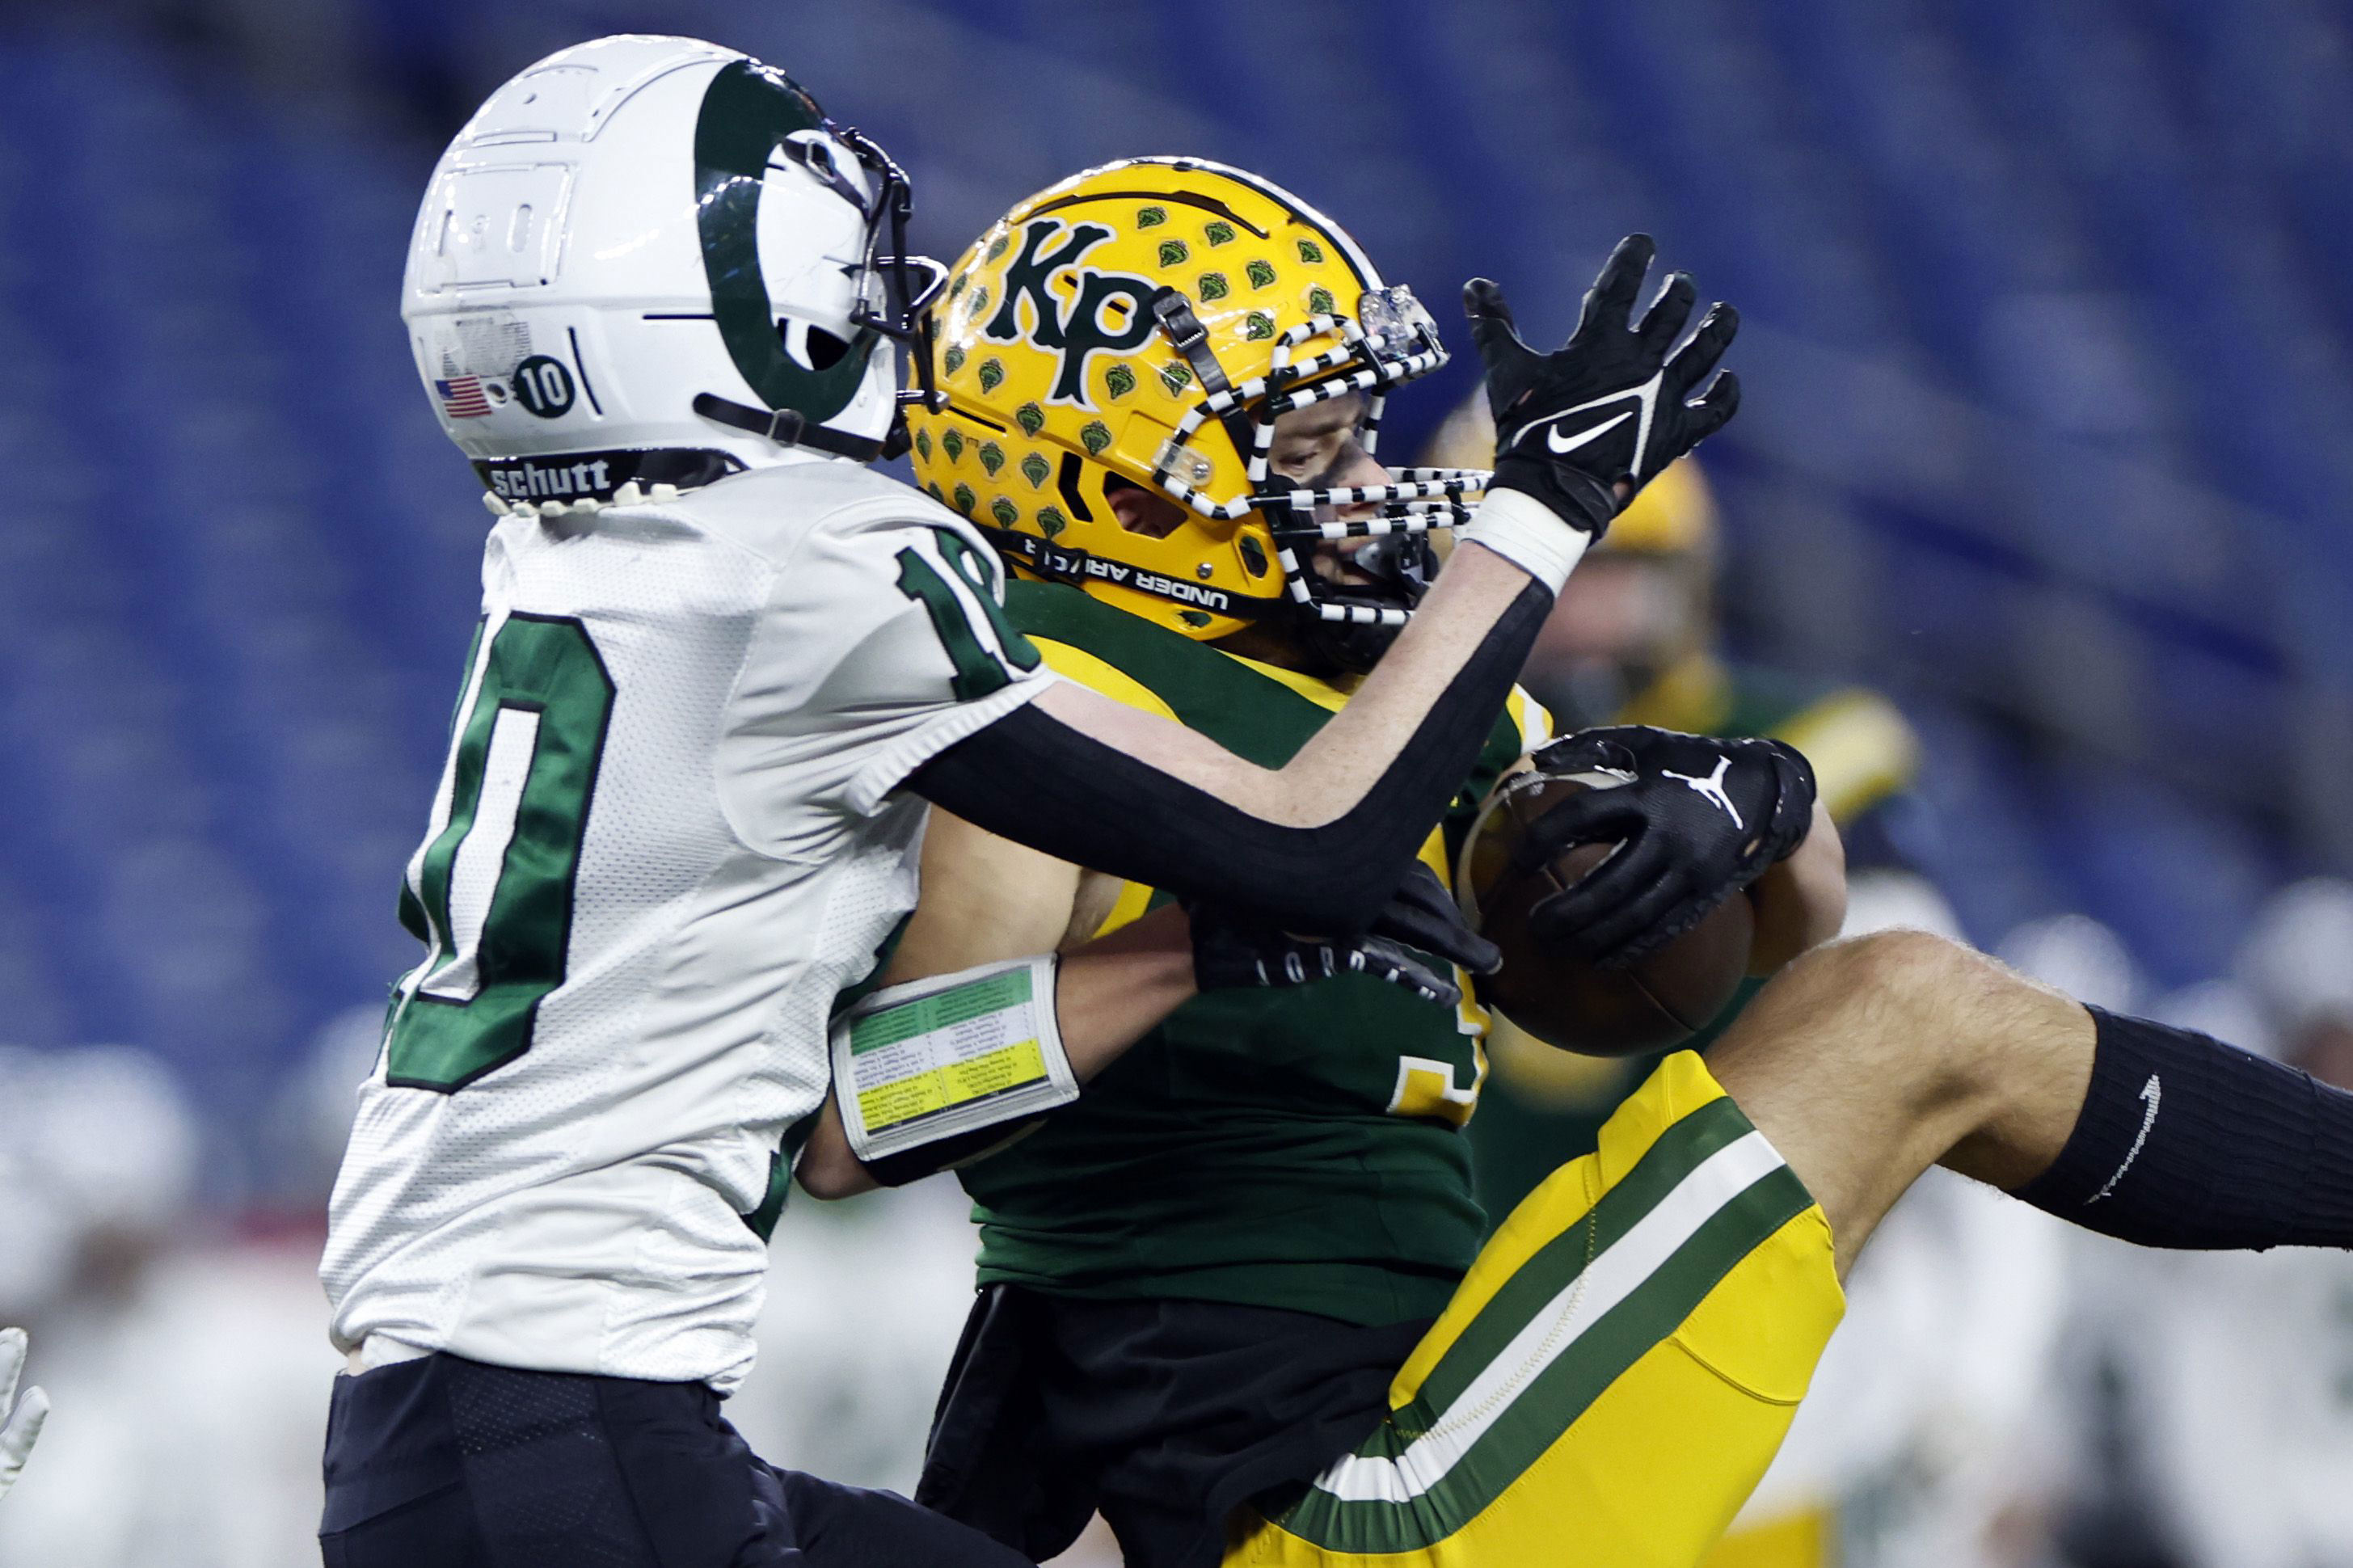 MIAA Super Bowl live updates King Philip wears the Division 2 crown